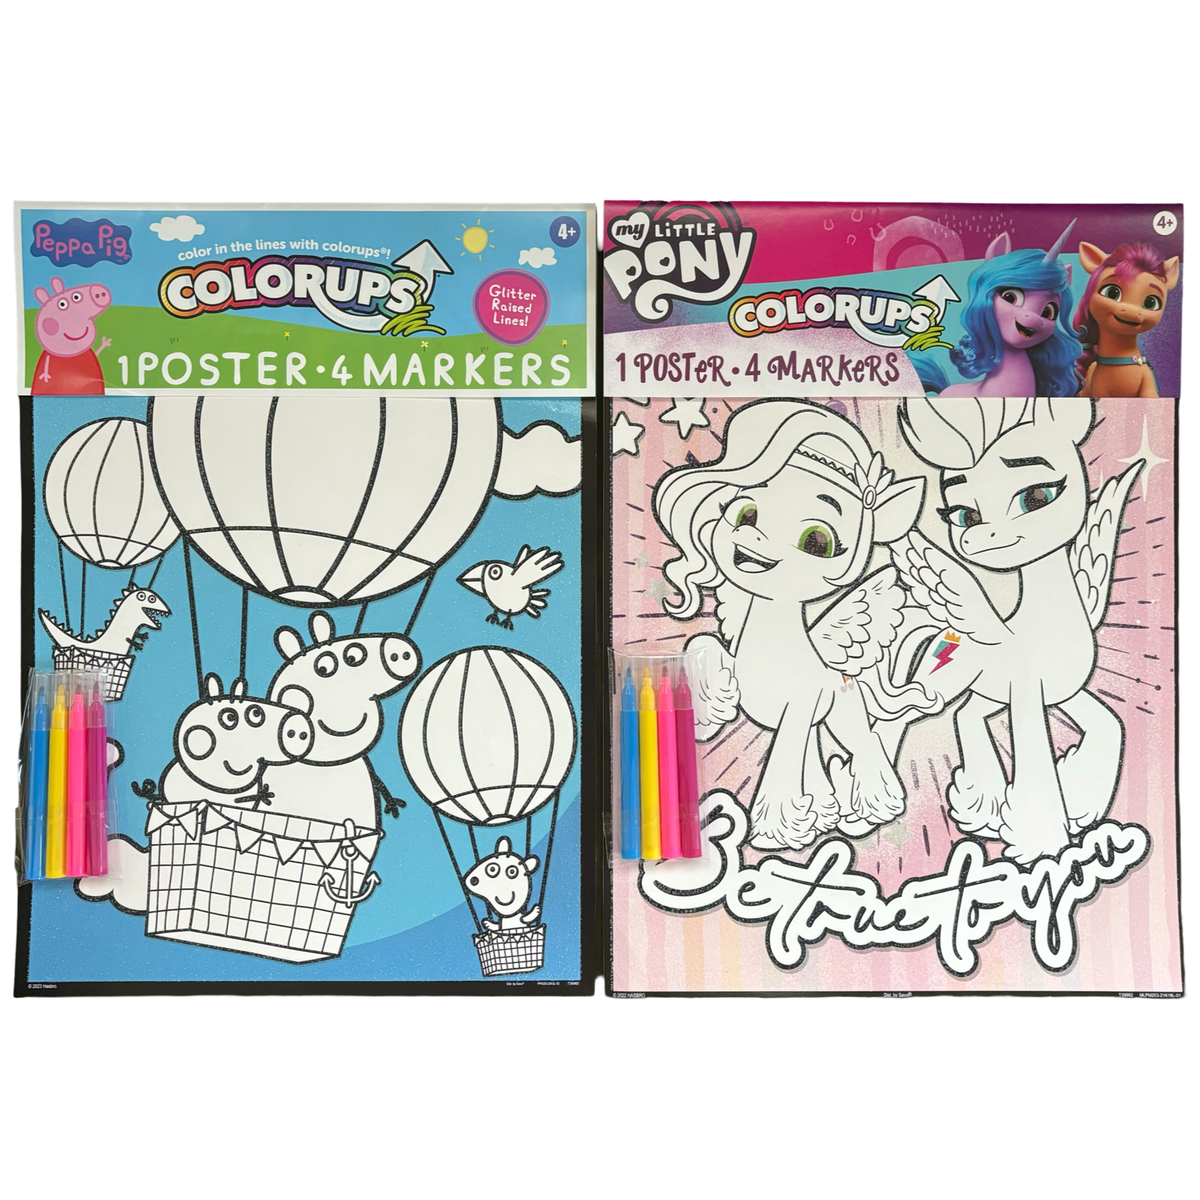 13" Colorups 2pk Posters - My Little Pony and Peppa Pig w/Markers